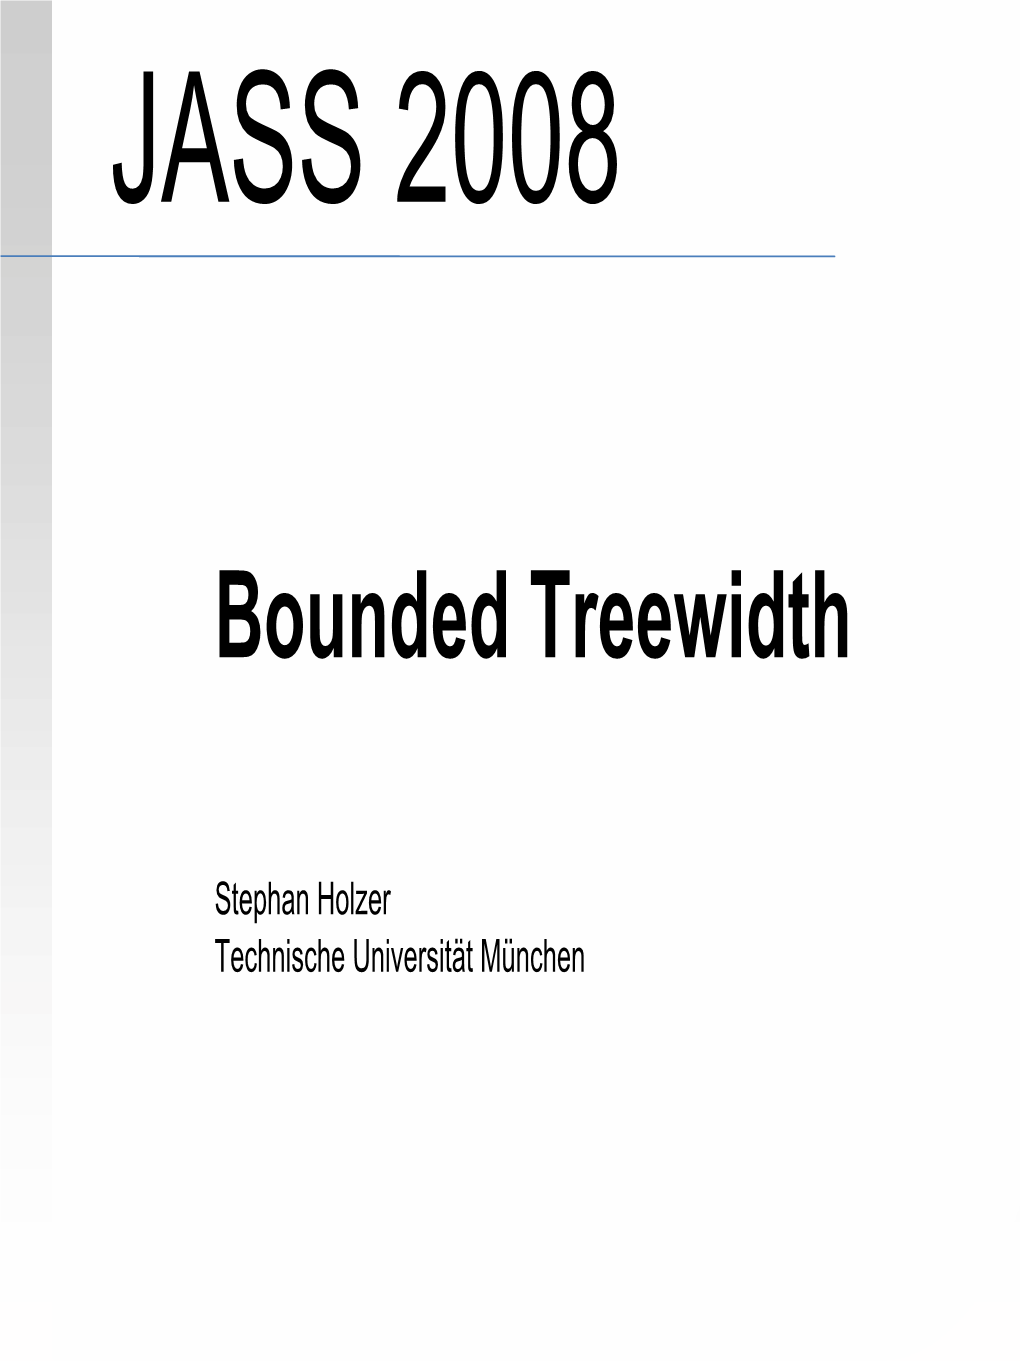 Bounded Treewidth